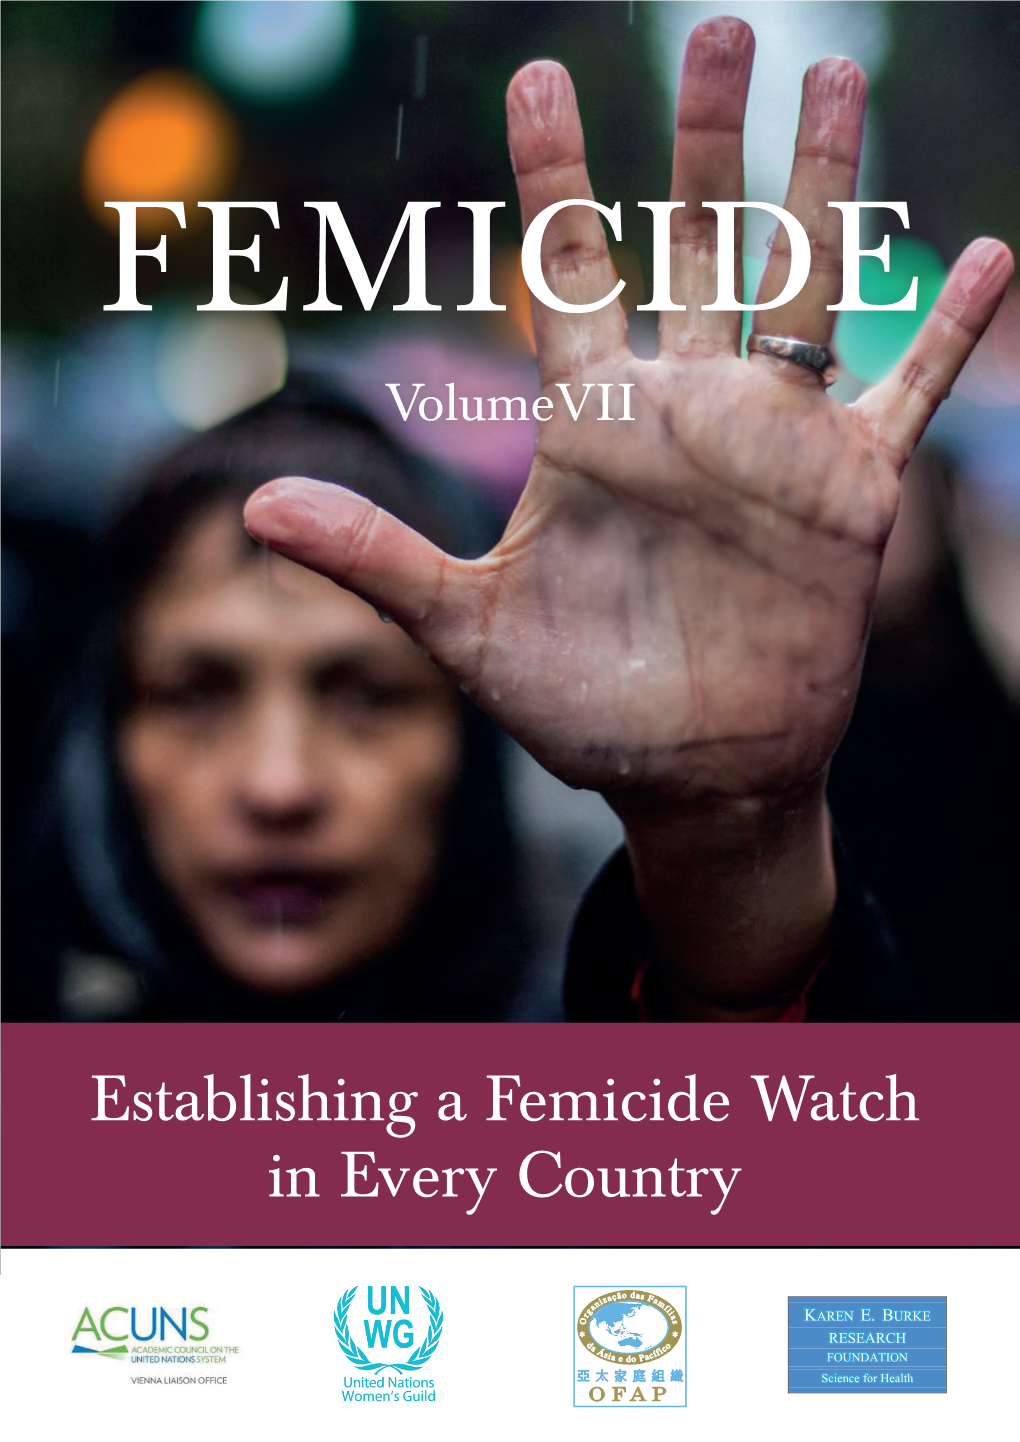 Establishing a Femicide Watch in Every Country